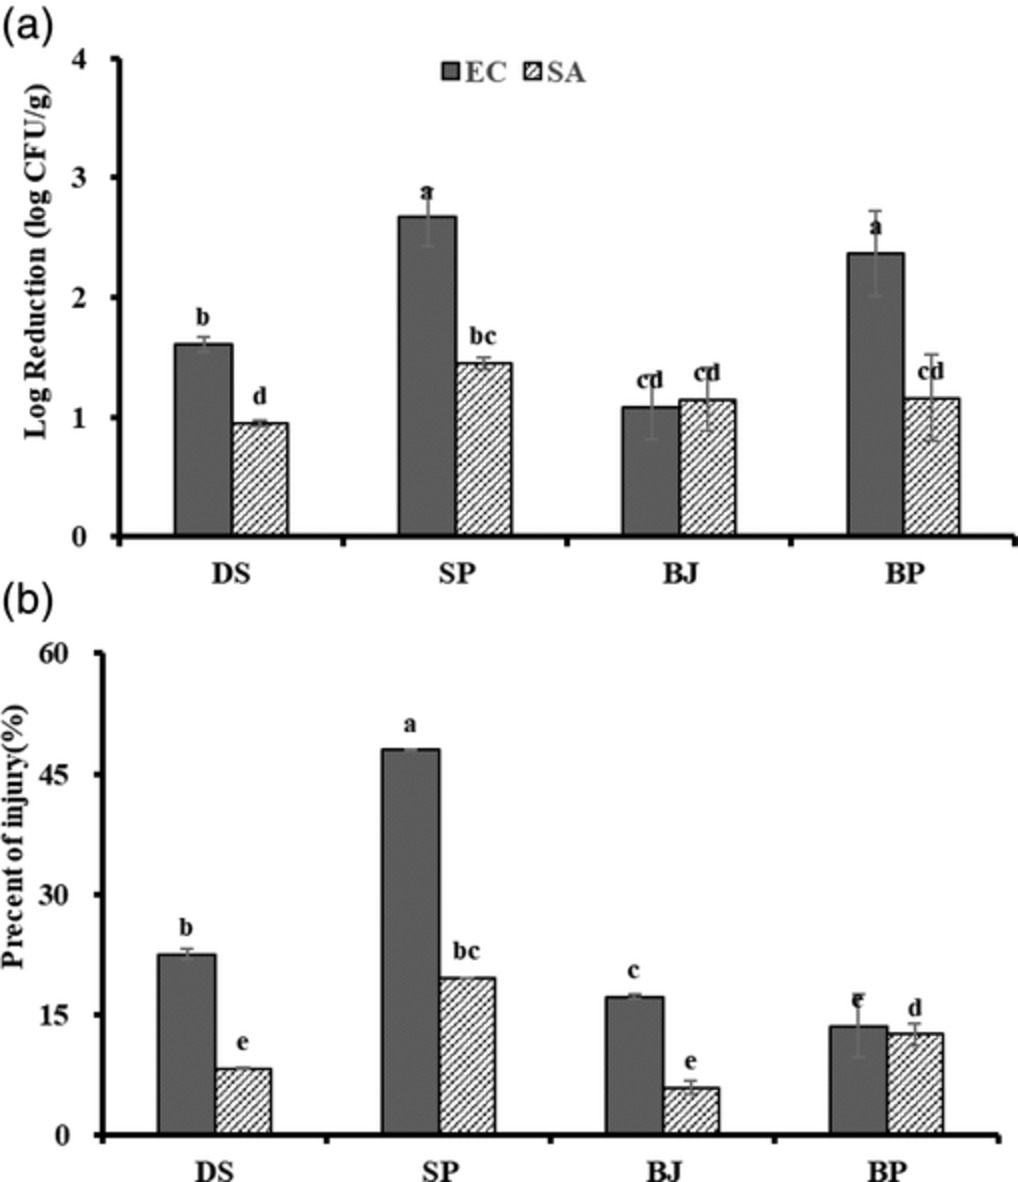 Inactivating effect of dielectric barrier discharge plasma on Escherichia coli O157:H7 and Staphylococcus aureus in various dried products